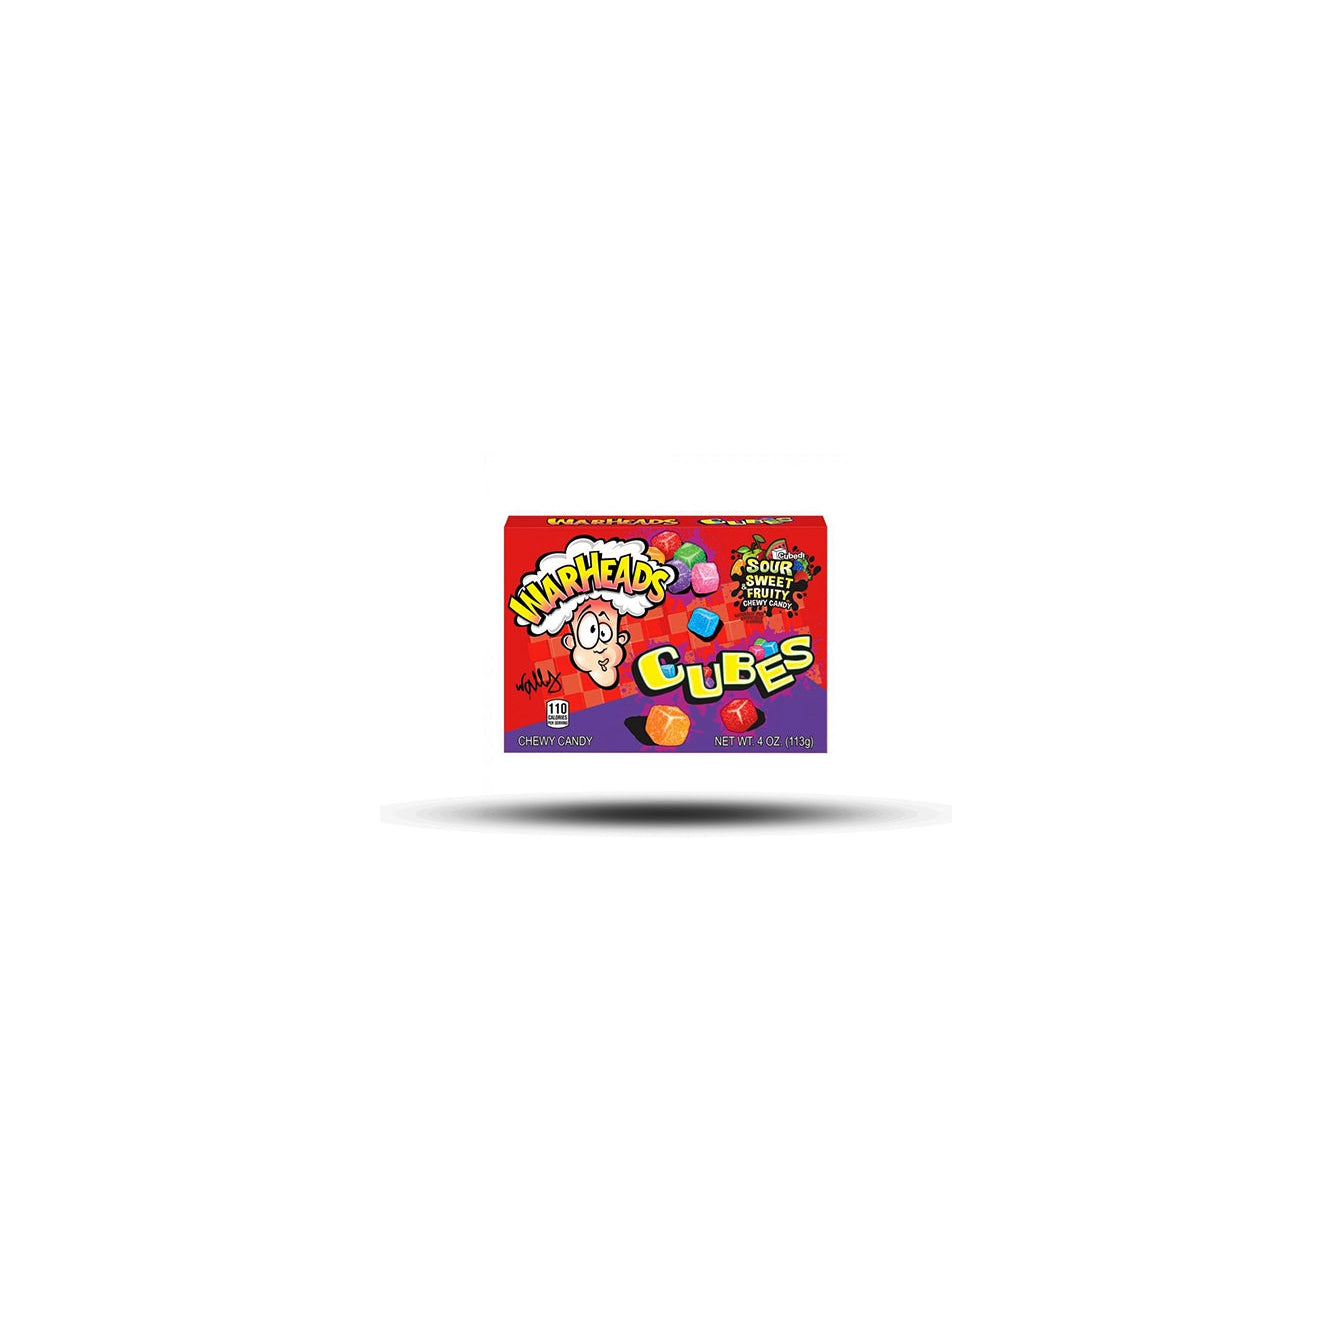 Warheads - Chewy Cubes 113g Box-Impact Confections, INC.-SNACK SHOP AUSTRIA